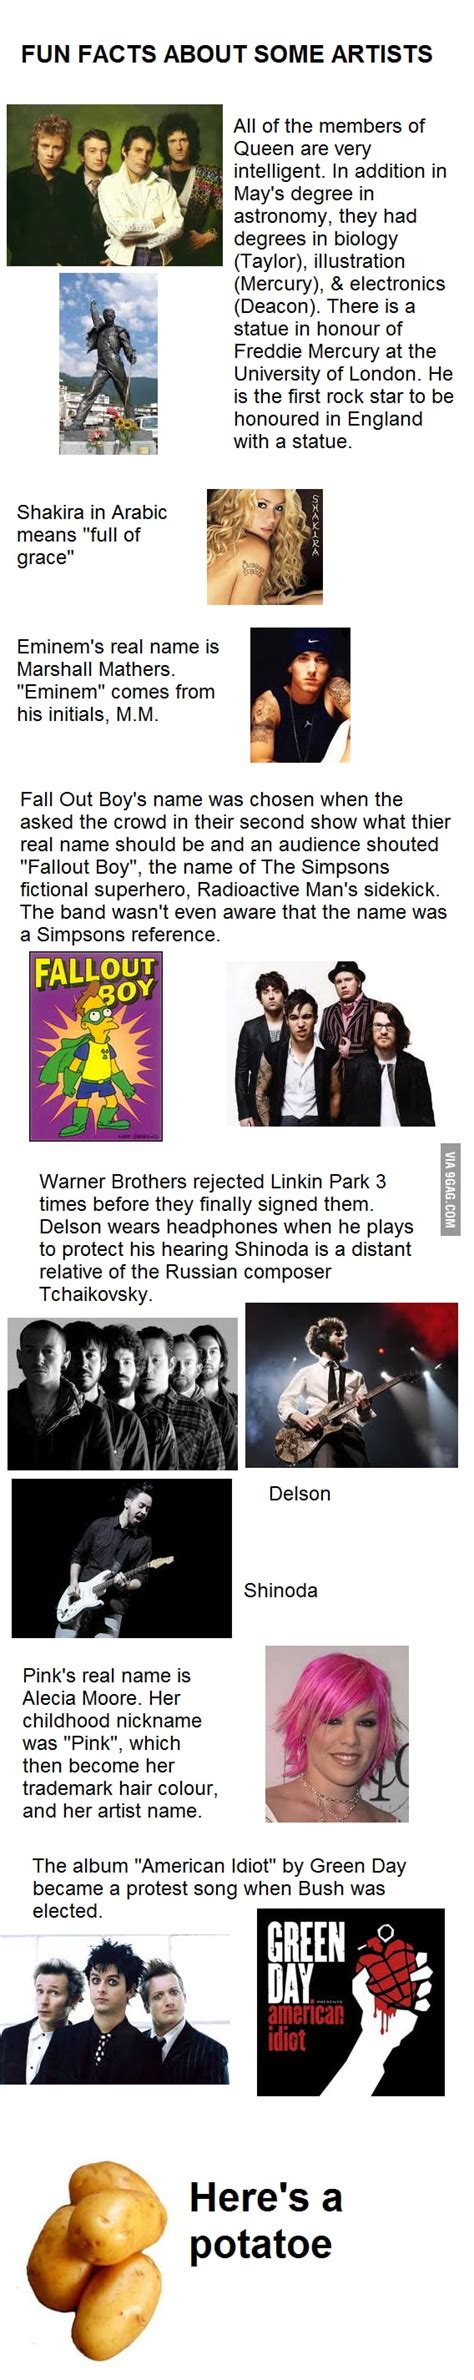 Awesome Music Facts 9gag